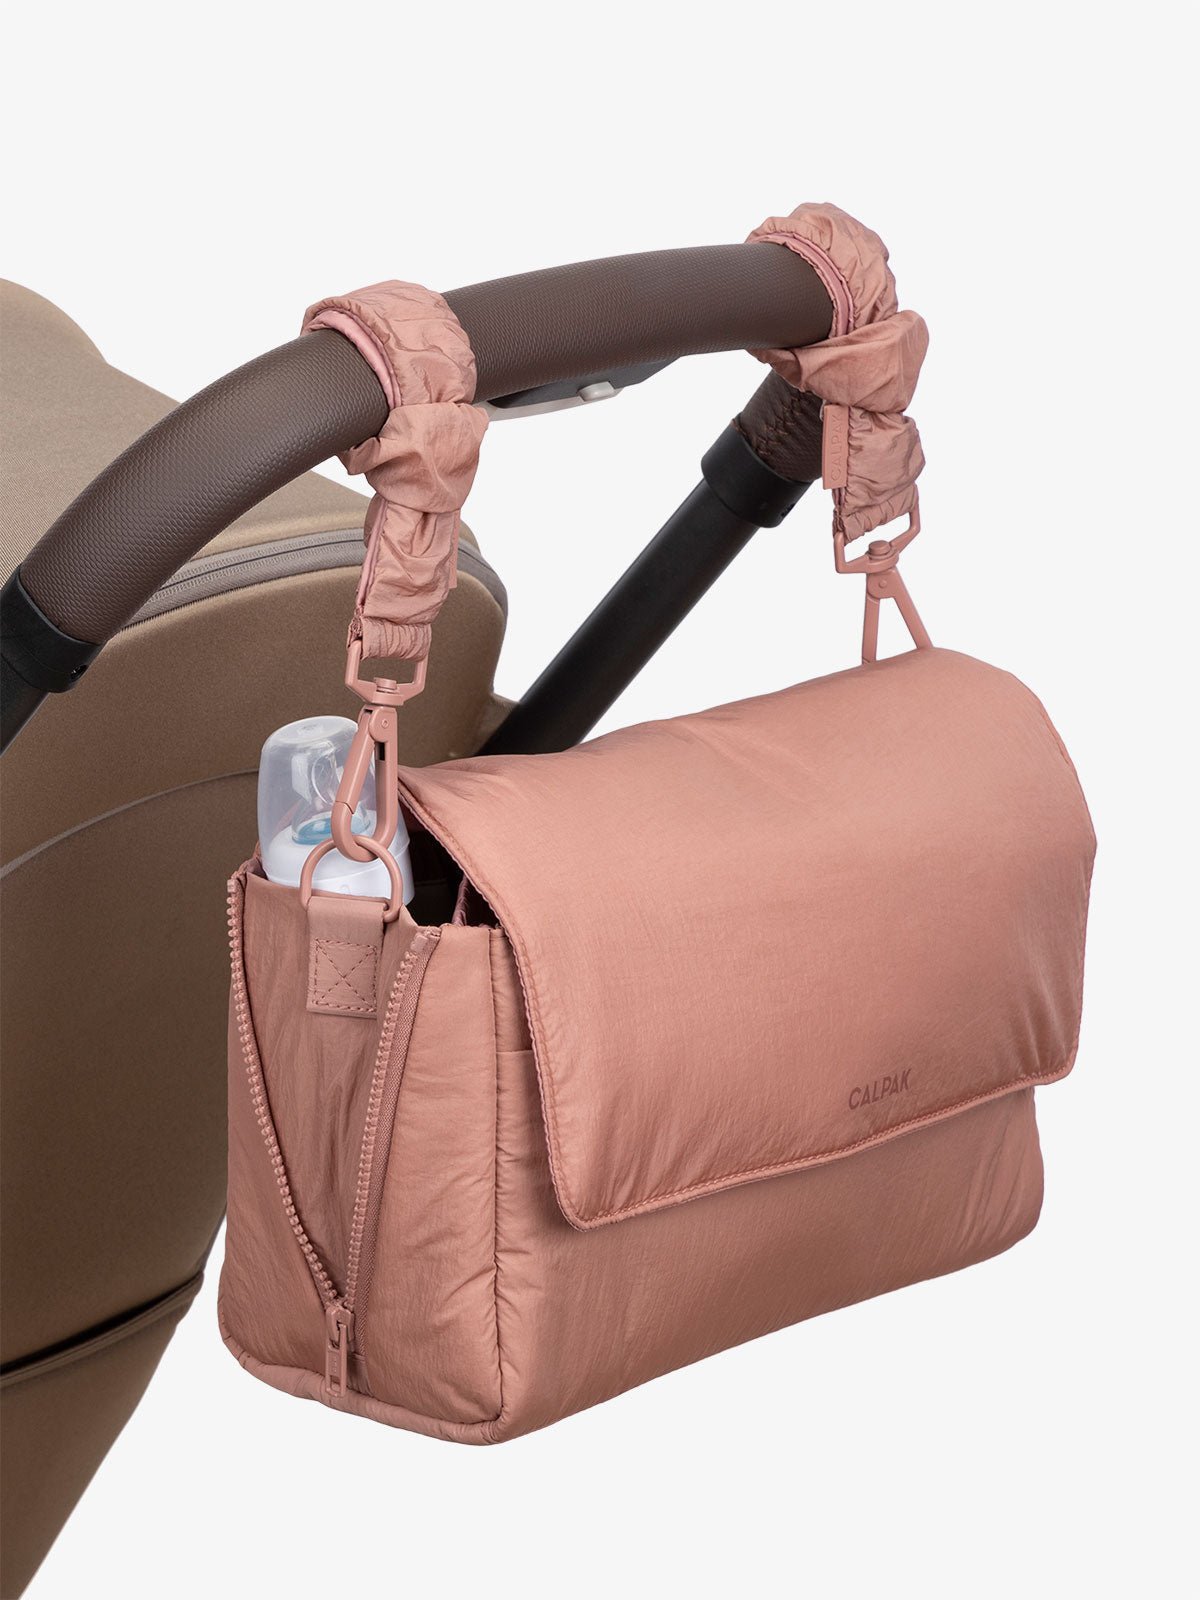 CALPAK Convertible Stroller Caddy Crossbody with included stroller straps in peony pink